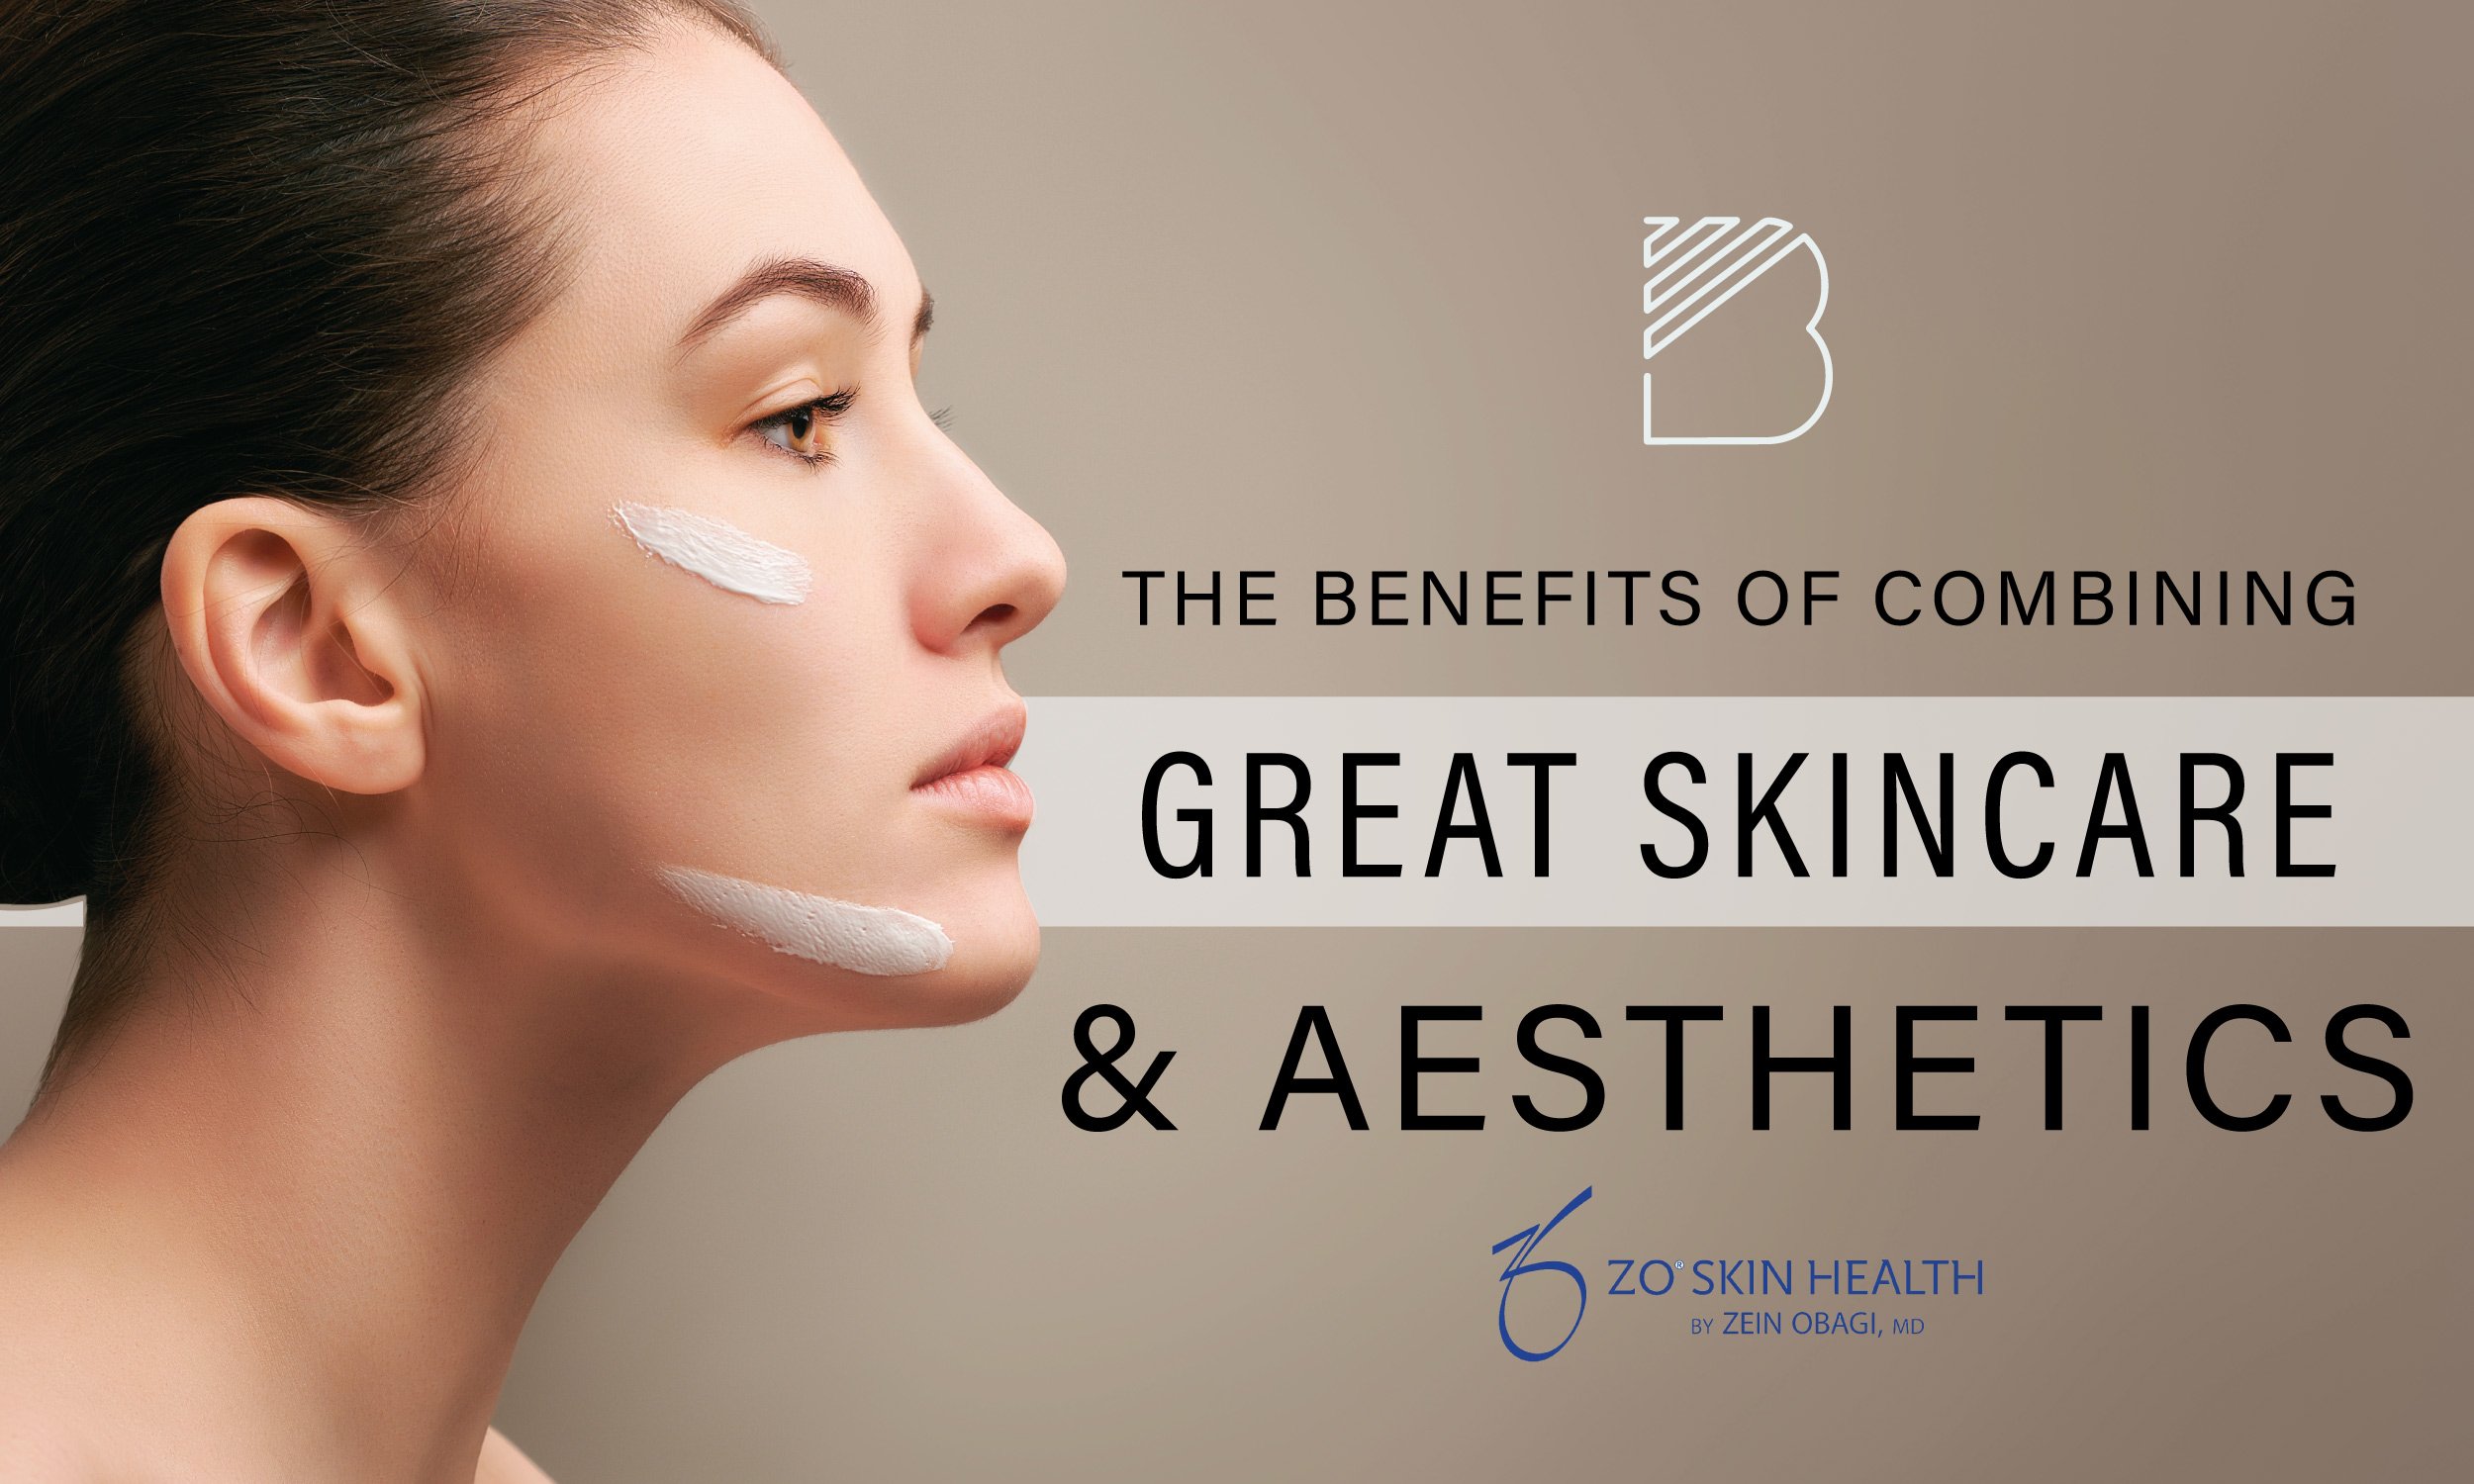 The Benefits of Combining Great Skin Care and Aesthetic Treatments ...